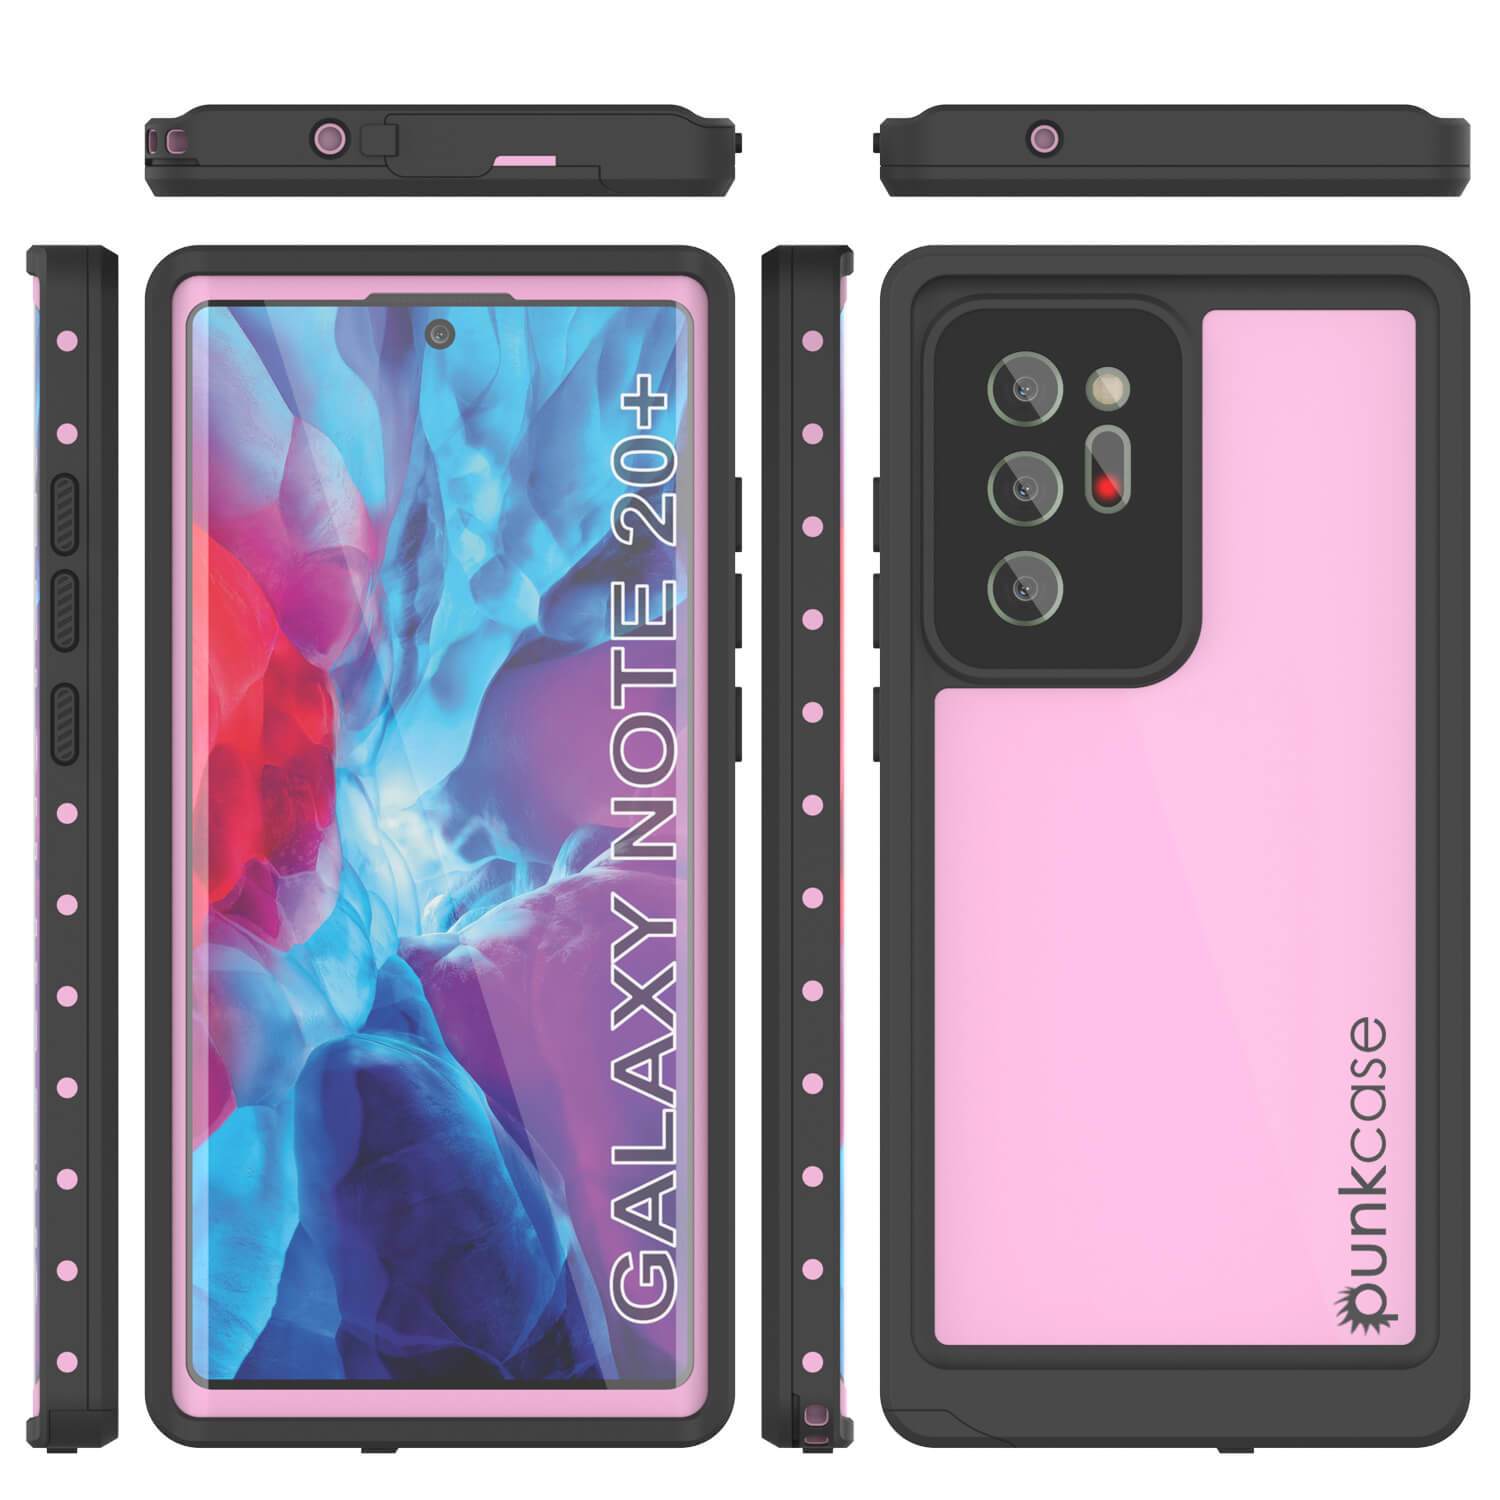 Galaxy Note 20 Ultra Waterproof Case, Punkcase Studstar Pink Thin Armor Cover